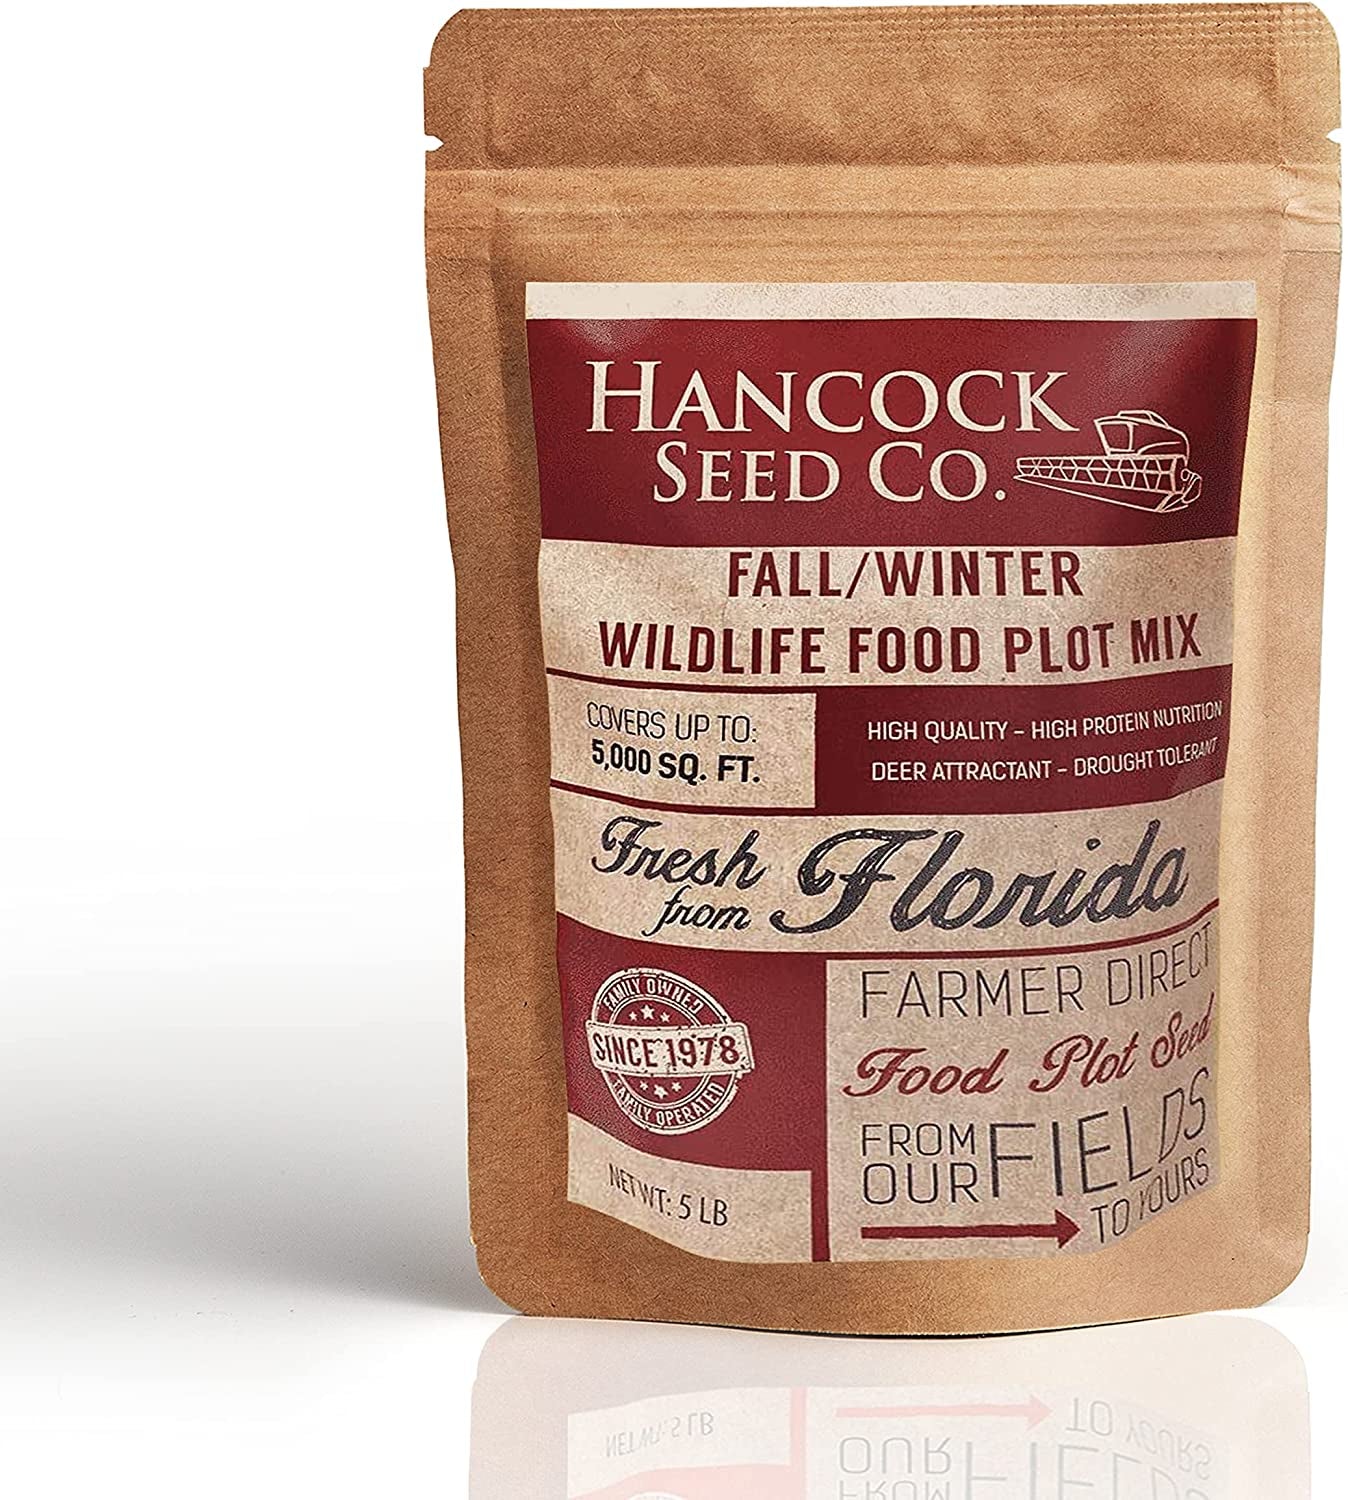 Hancock Fall & Winter Food Plot Seeds for Deer and Game, High Protein, Fast Germinating Mix, 20 LB Bag